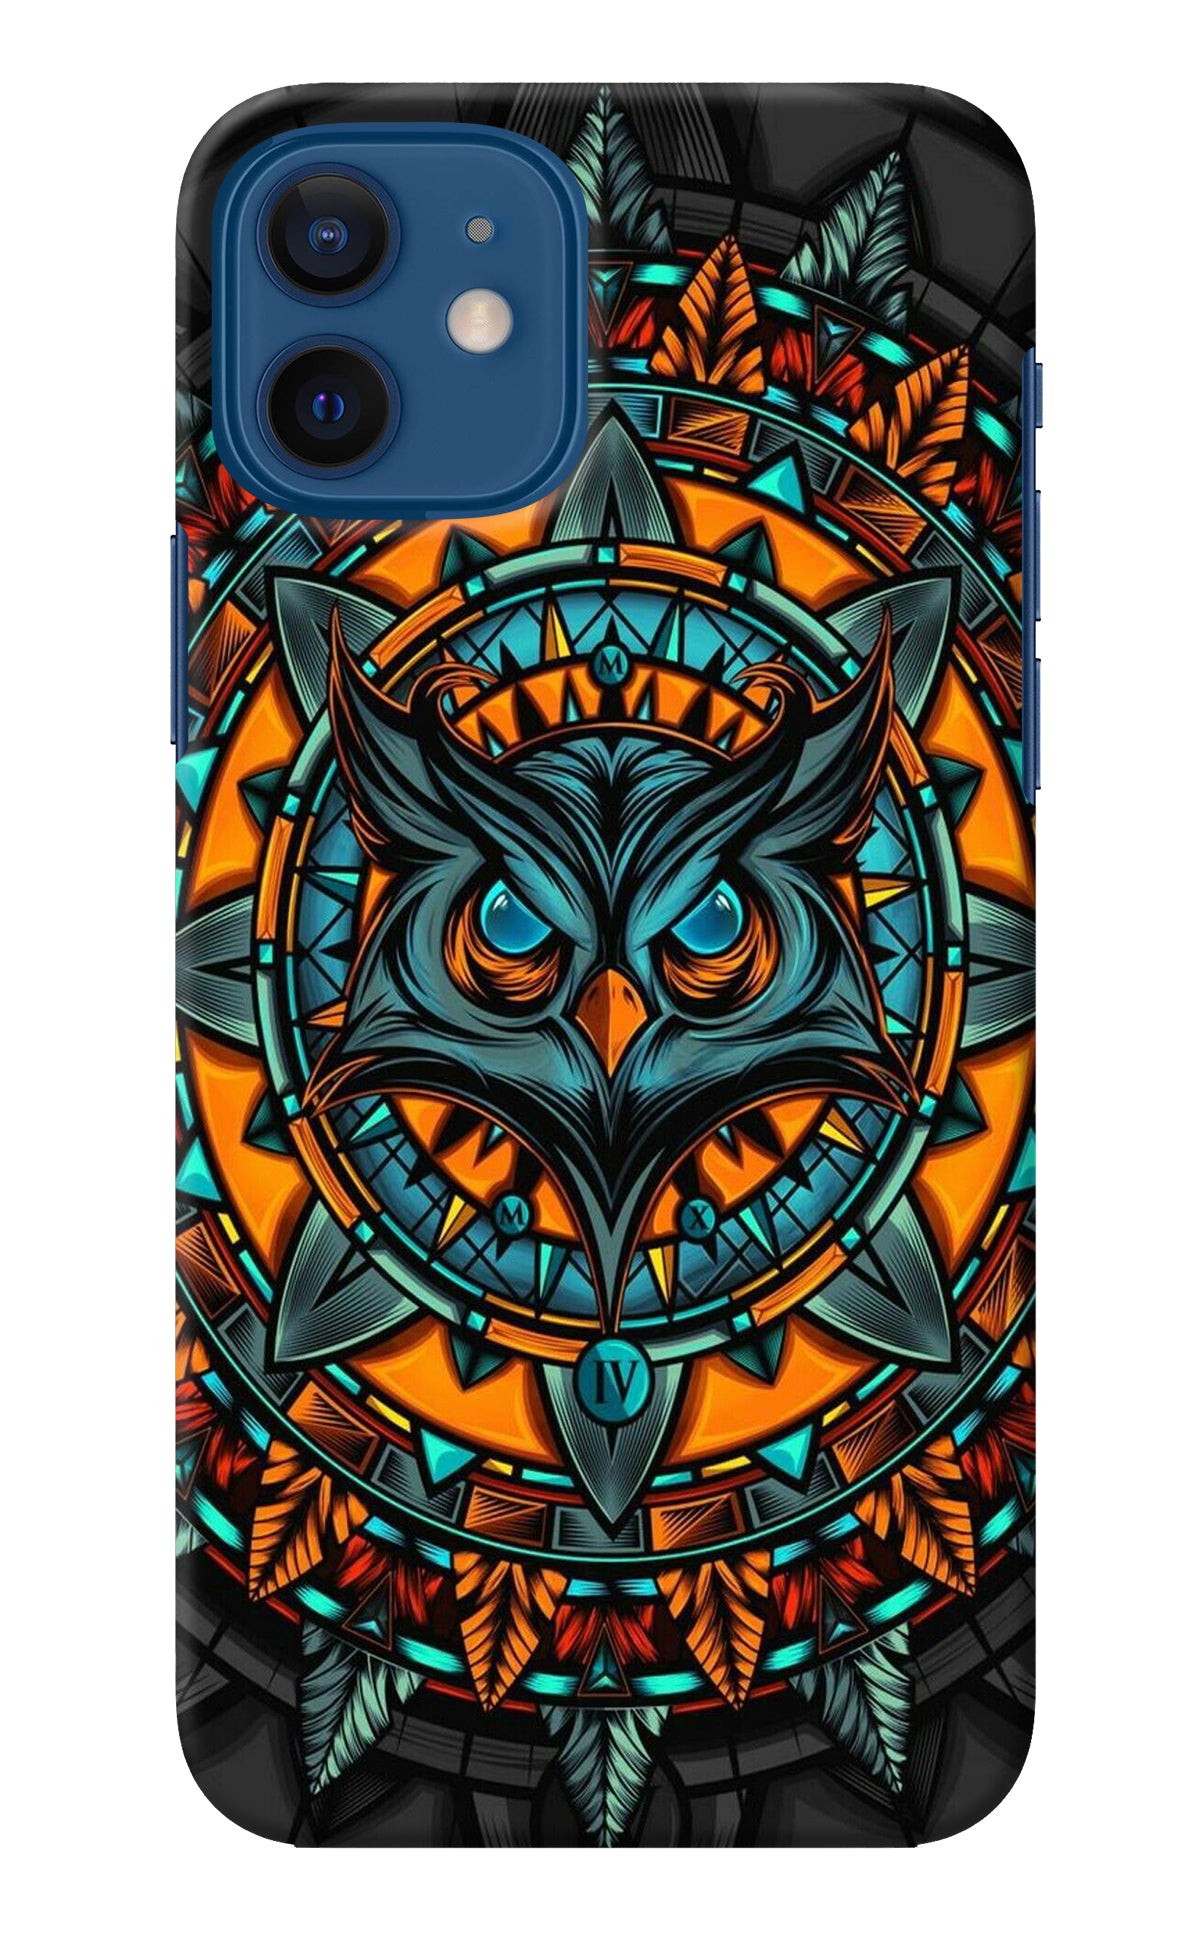 Angry Owl Art iPhone 12 Back Cover